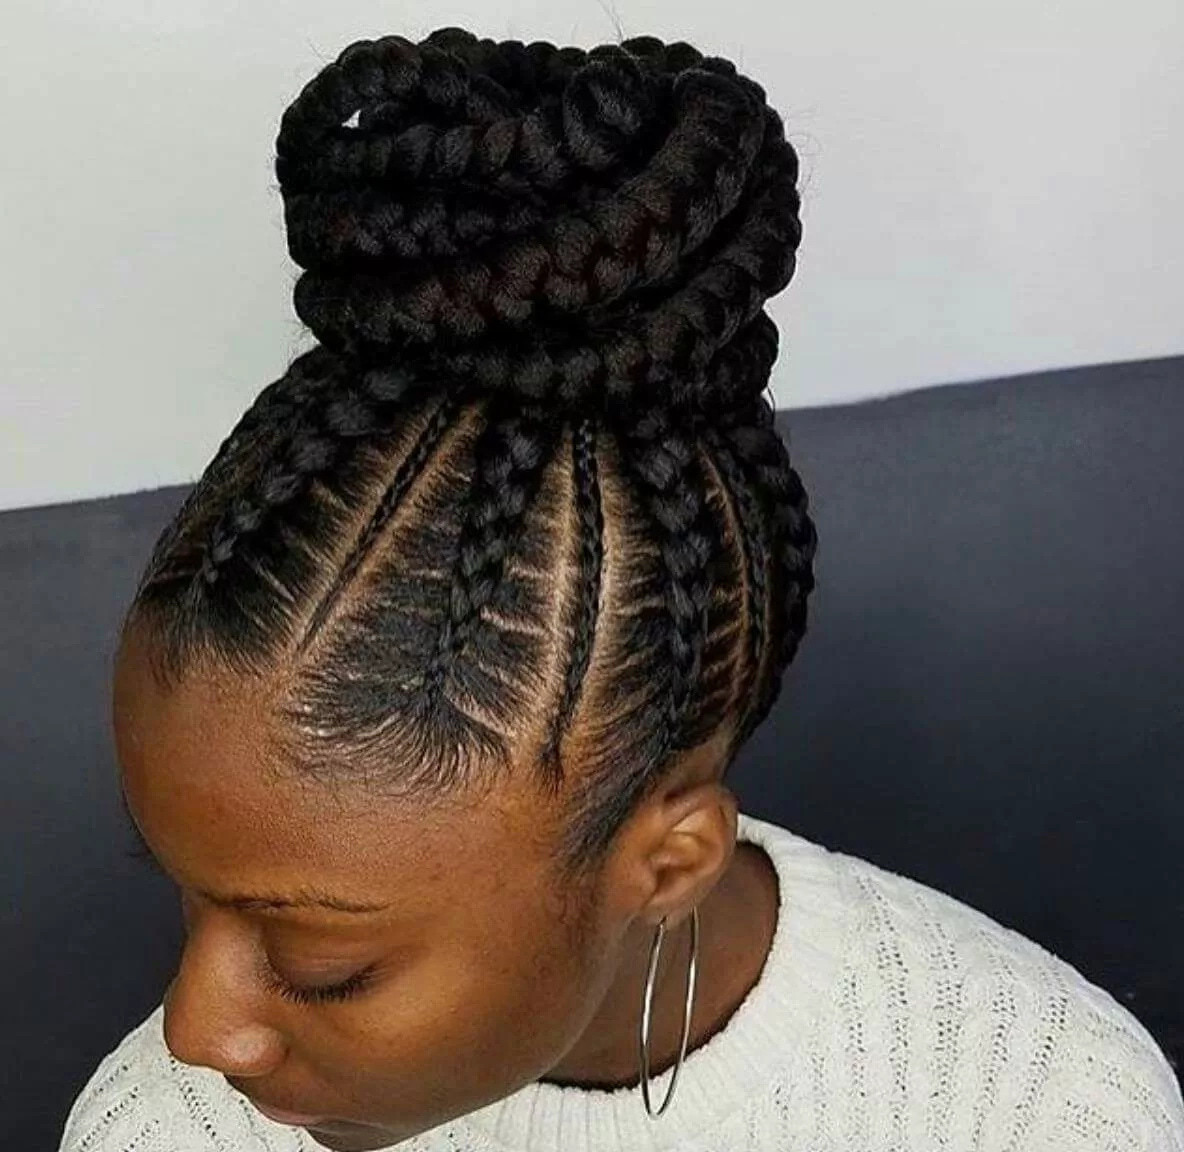 African Hairstyles Braids
 Top 10 African braiding hairstyles for la s PHOTOS